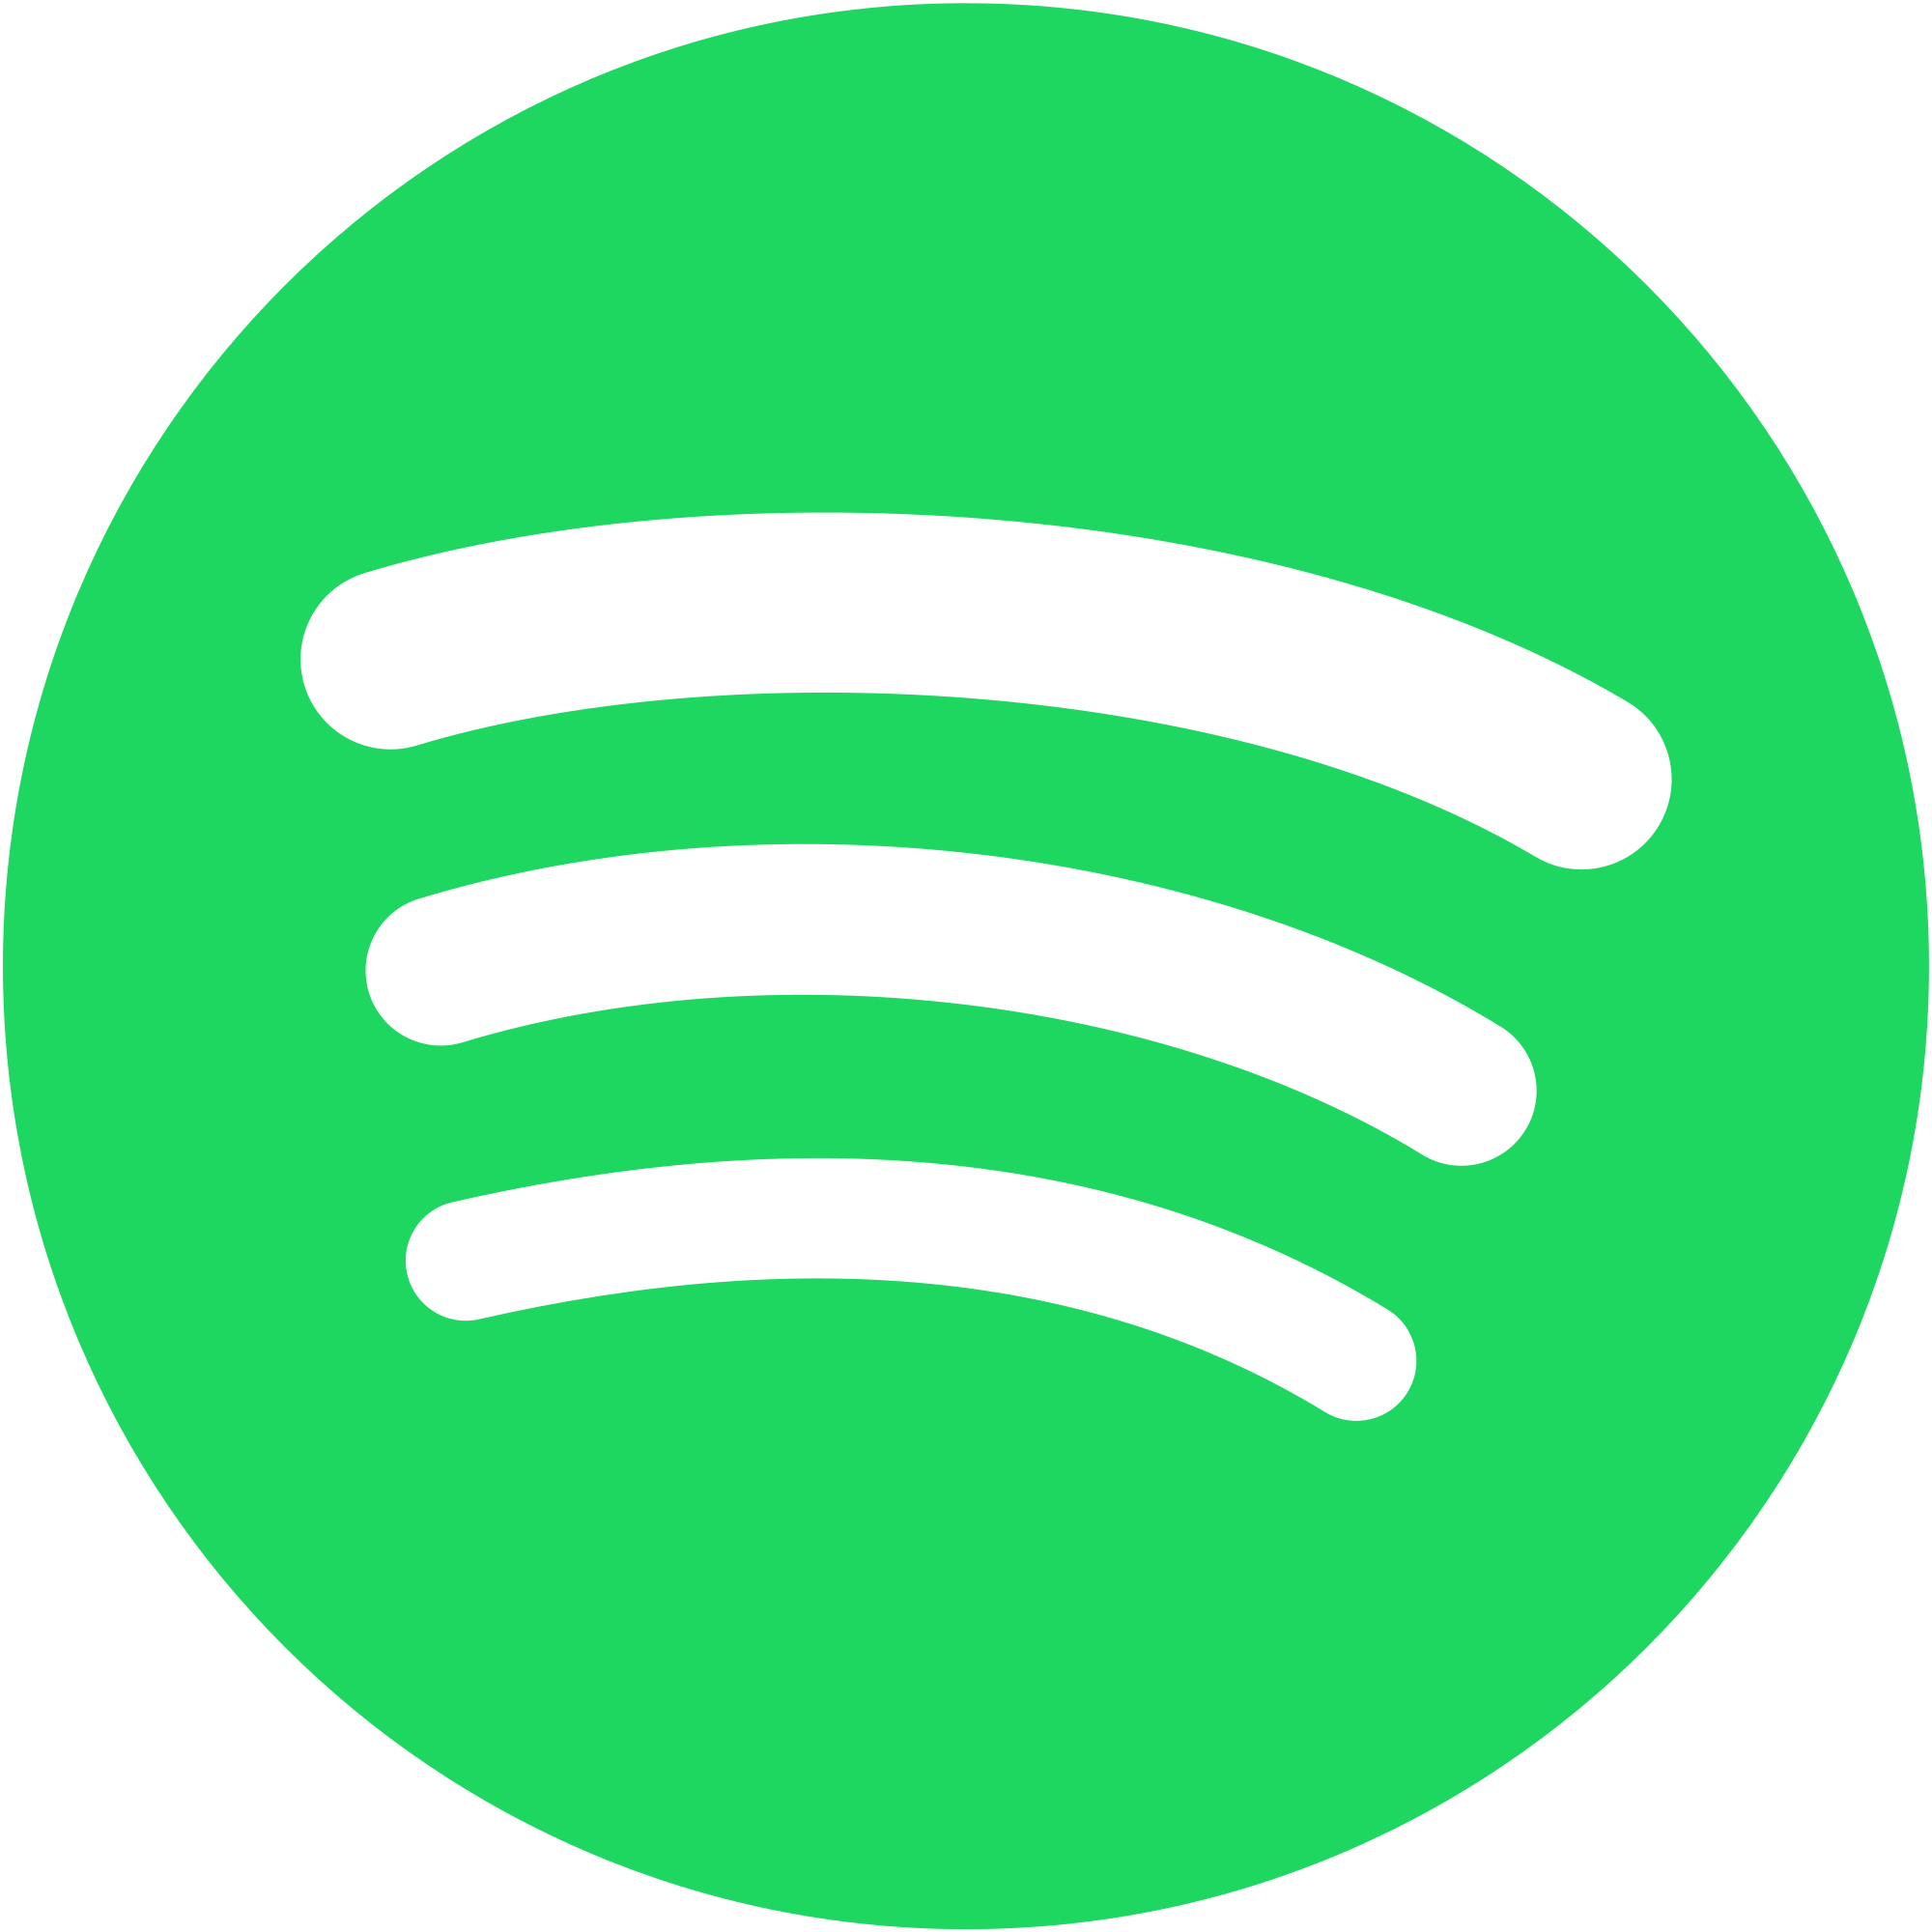 2000px-Spotify_logo_without_textsvgpng